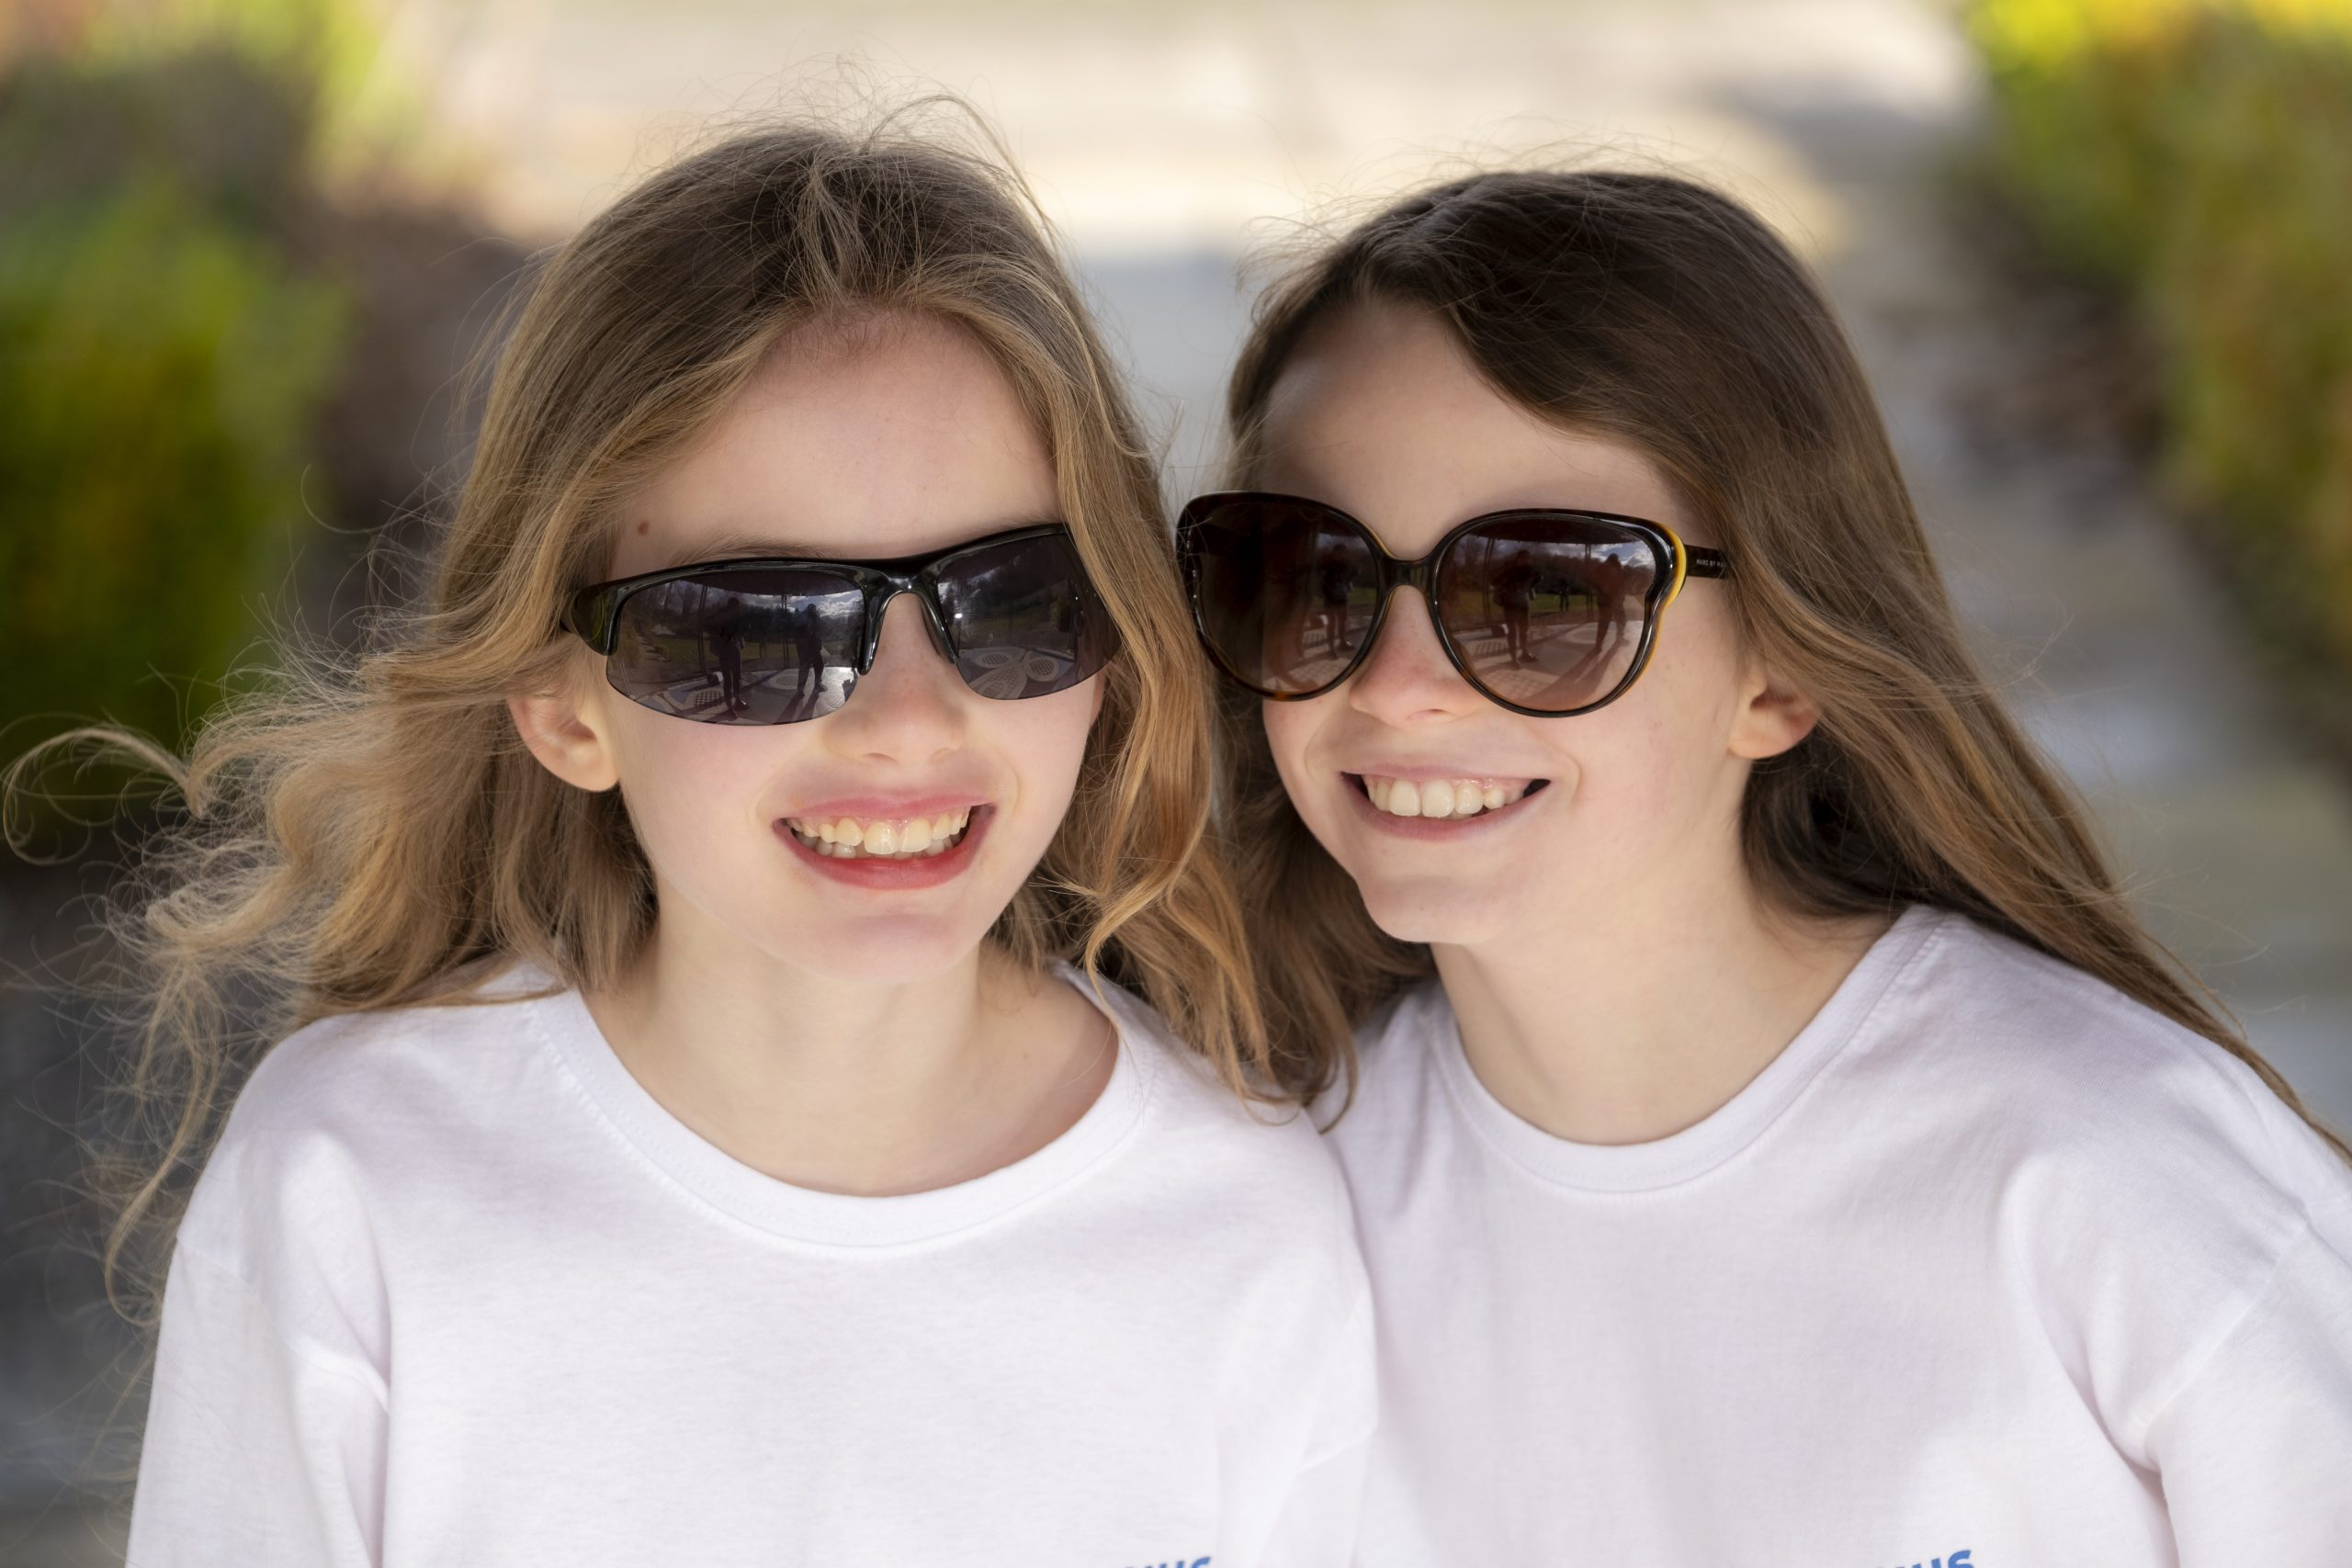 Two young girls wearing big sunglasses and white t-shirts smiling.